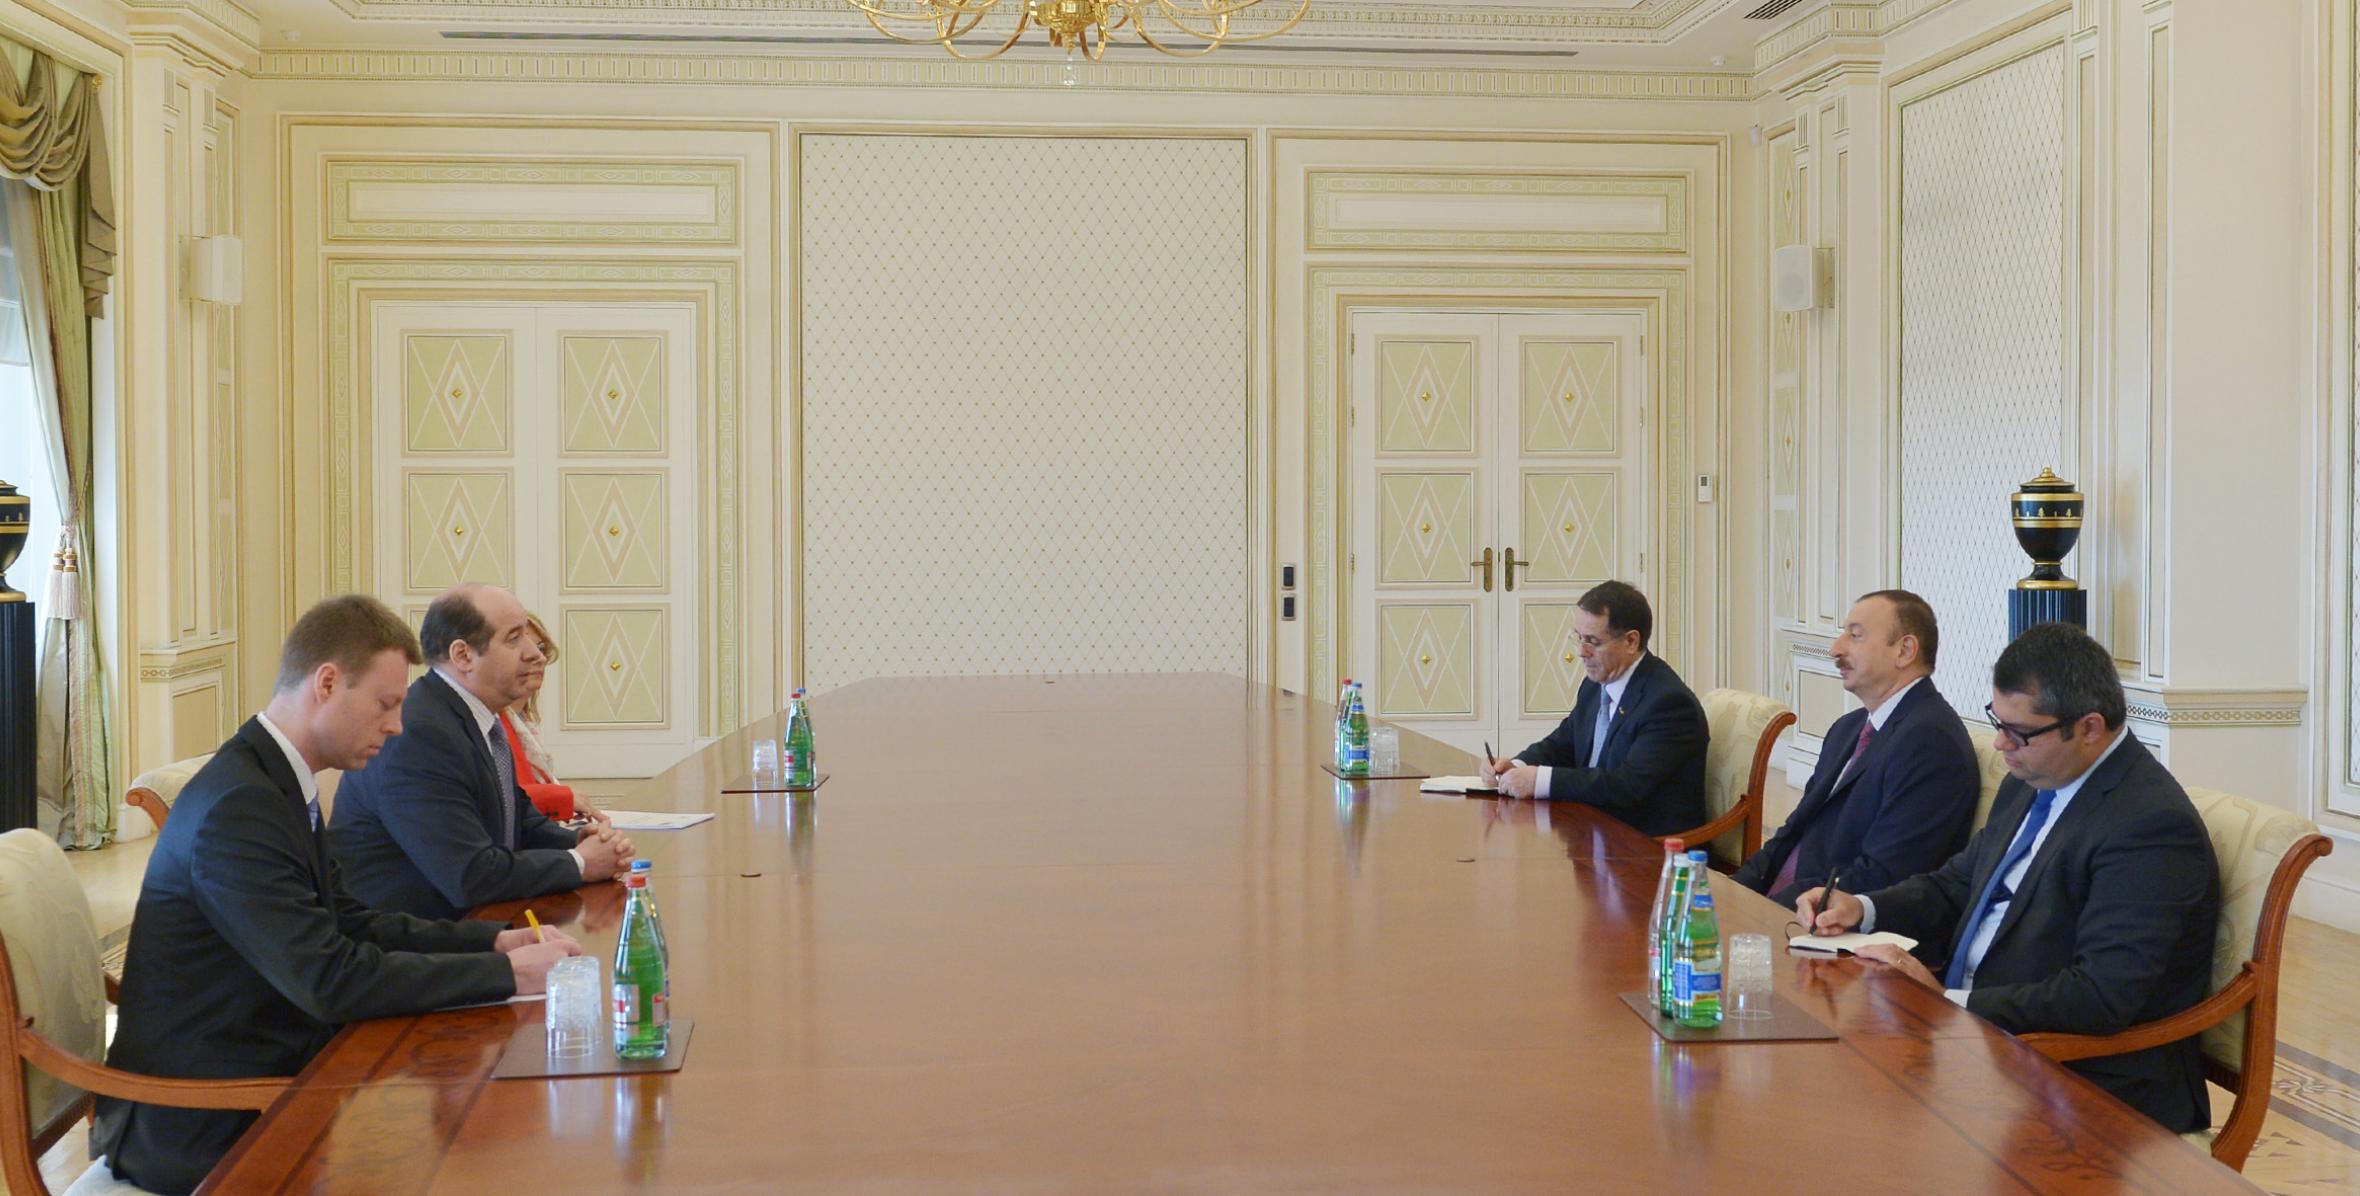 Ilham Aliyev received the newly appointed NATO Assistant Secretary General Sorin Ducaru